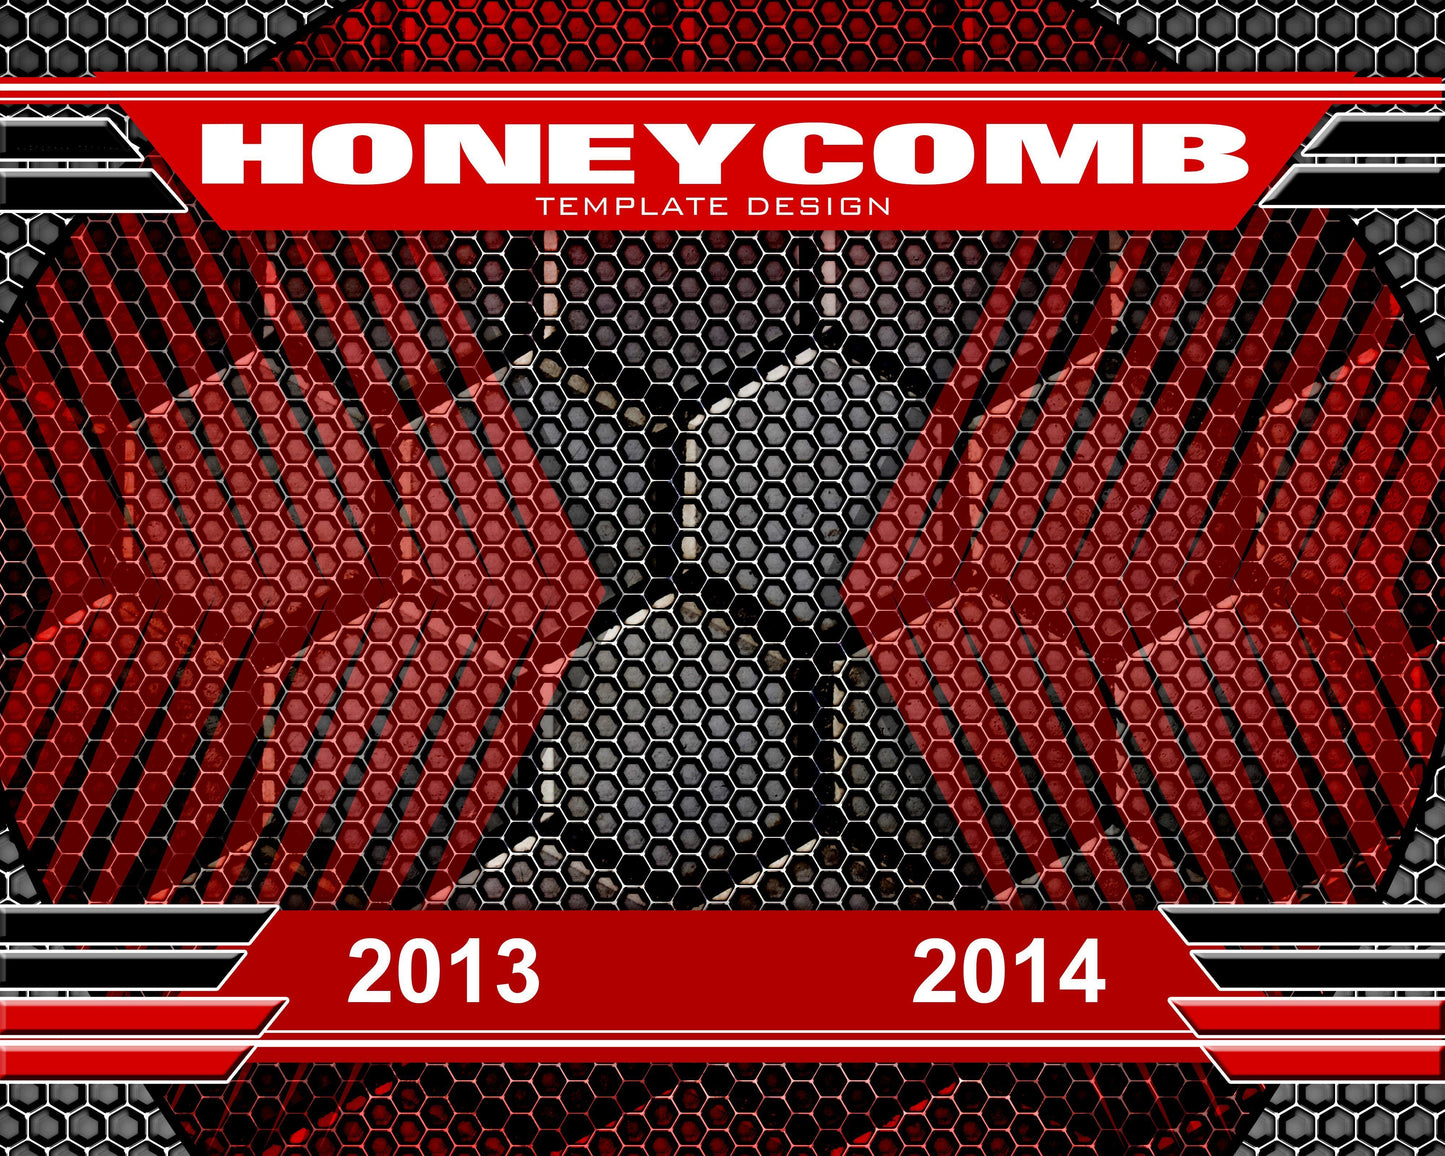 Honeycomb v.1 - Xtreme Team-Photoshop Template - Photo Solutions